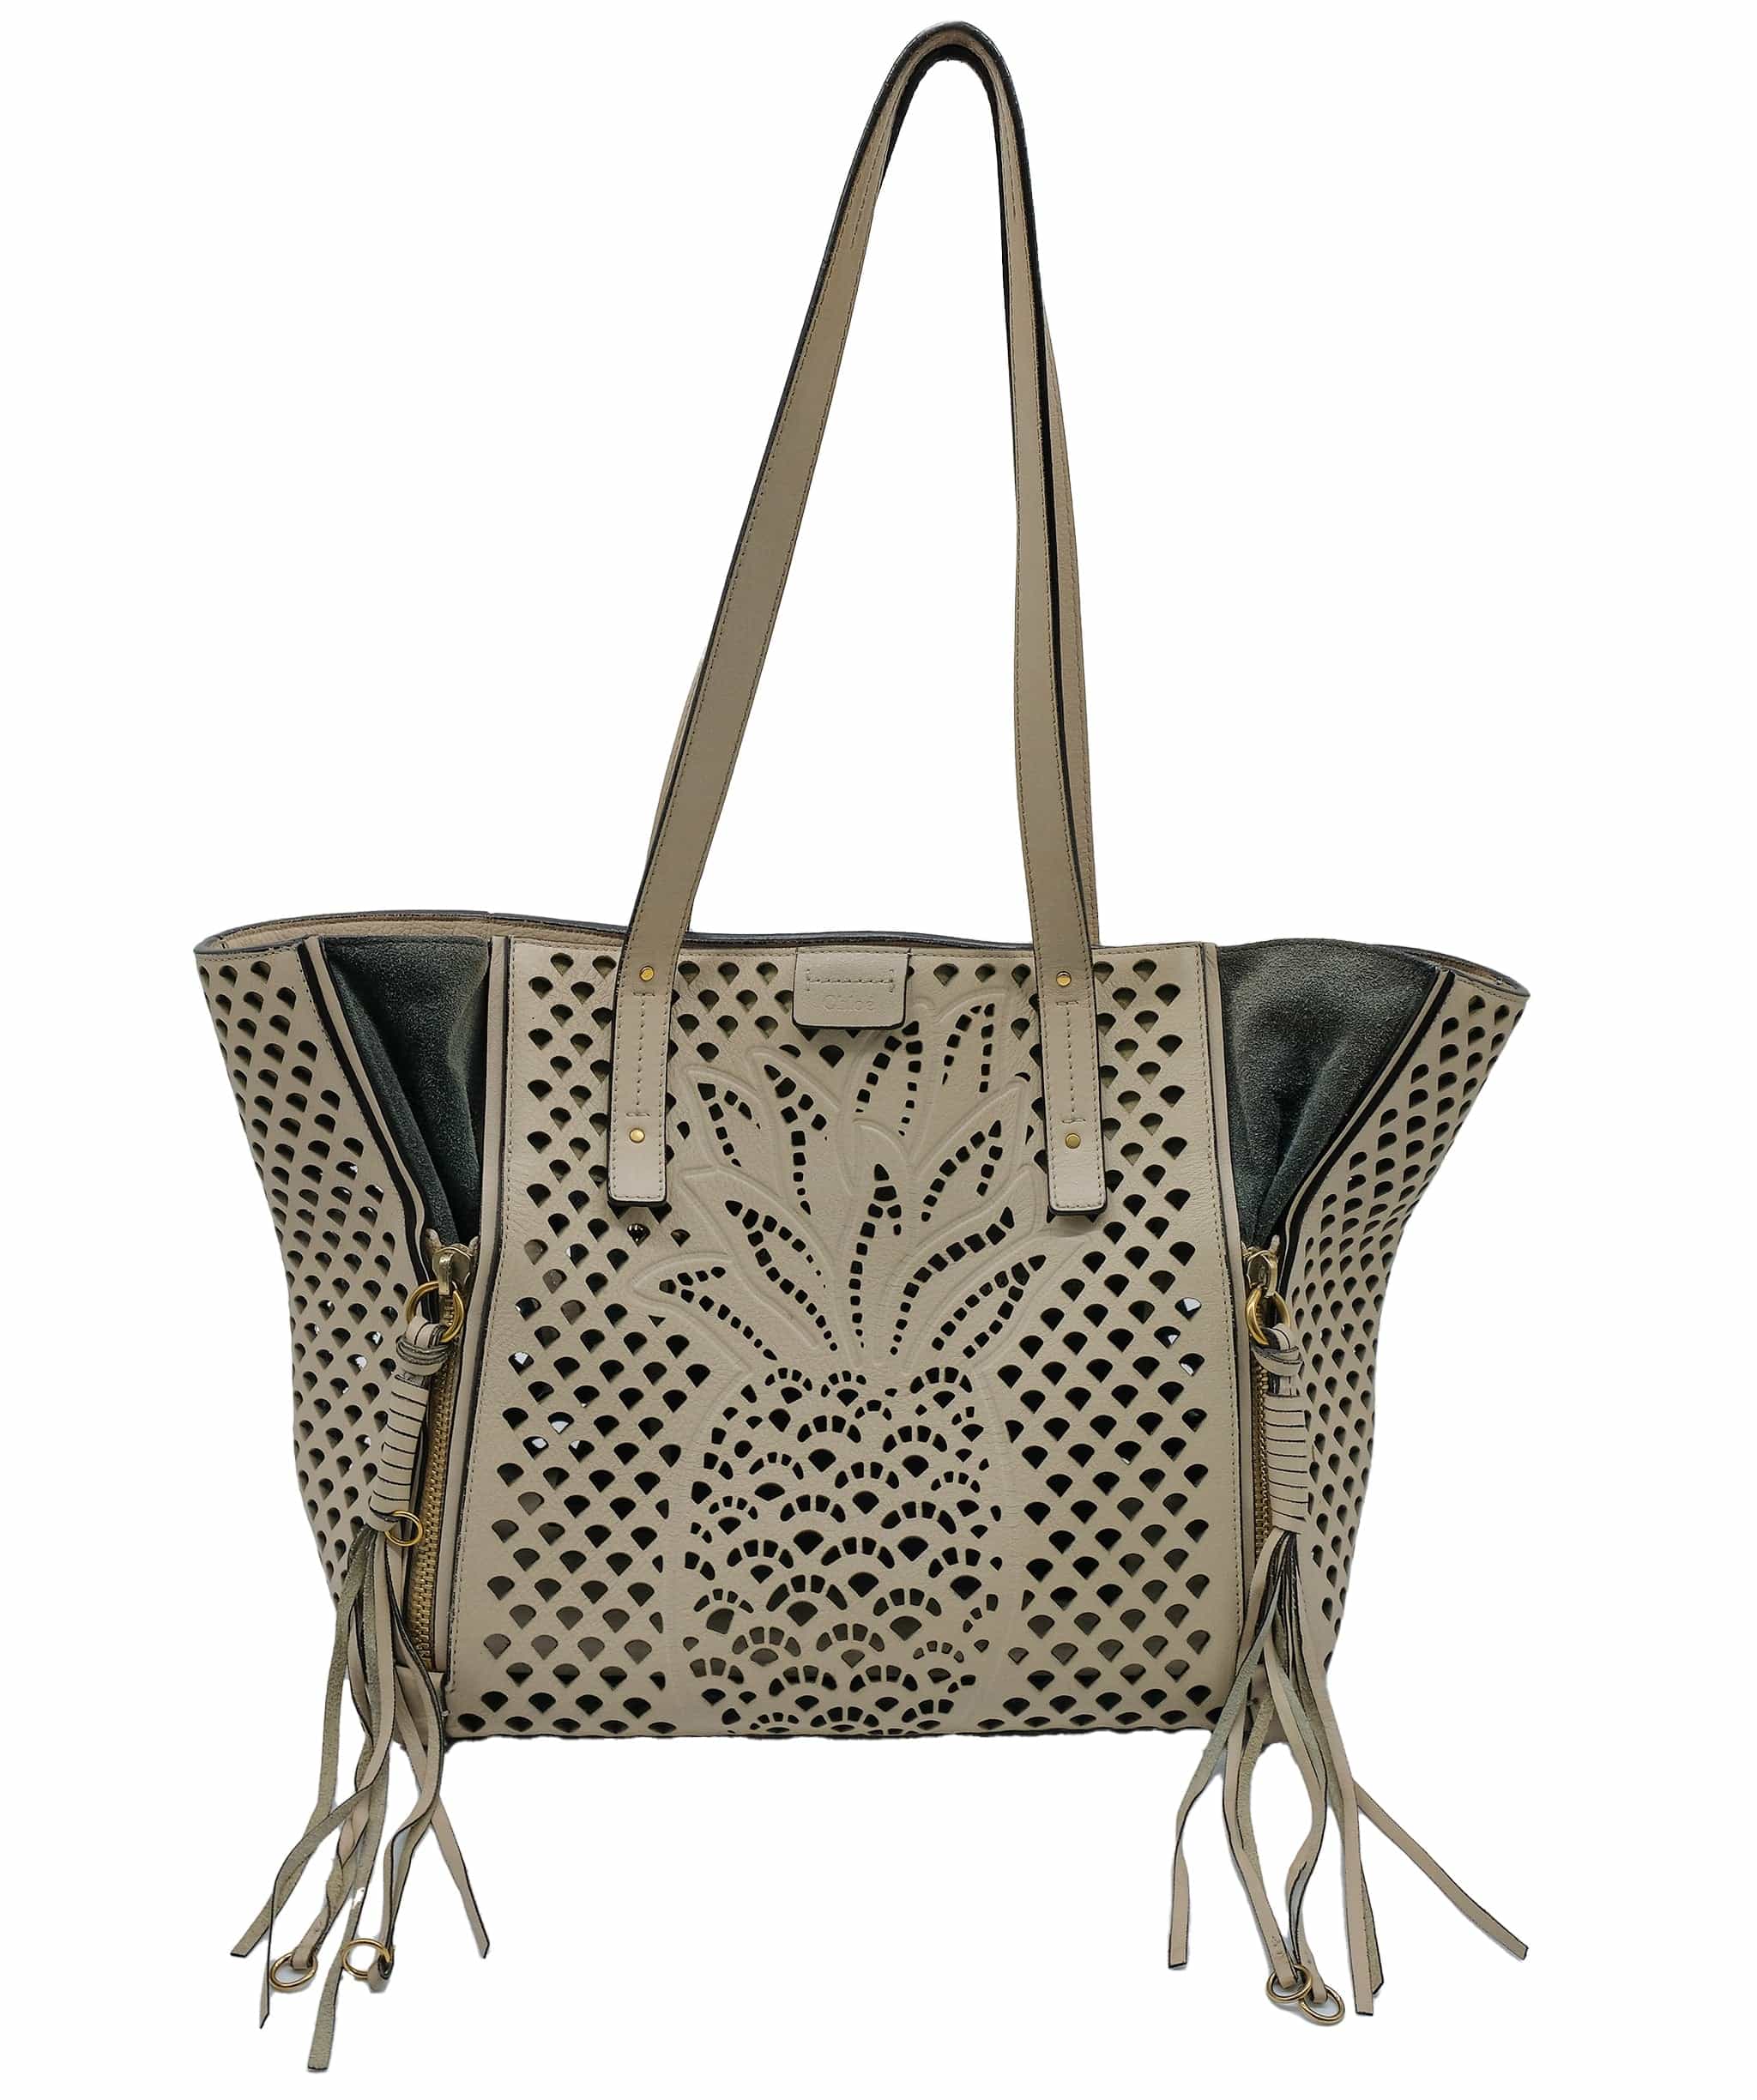 Chloé Chloe Tote perforated Beige Leather Bag RJC3251